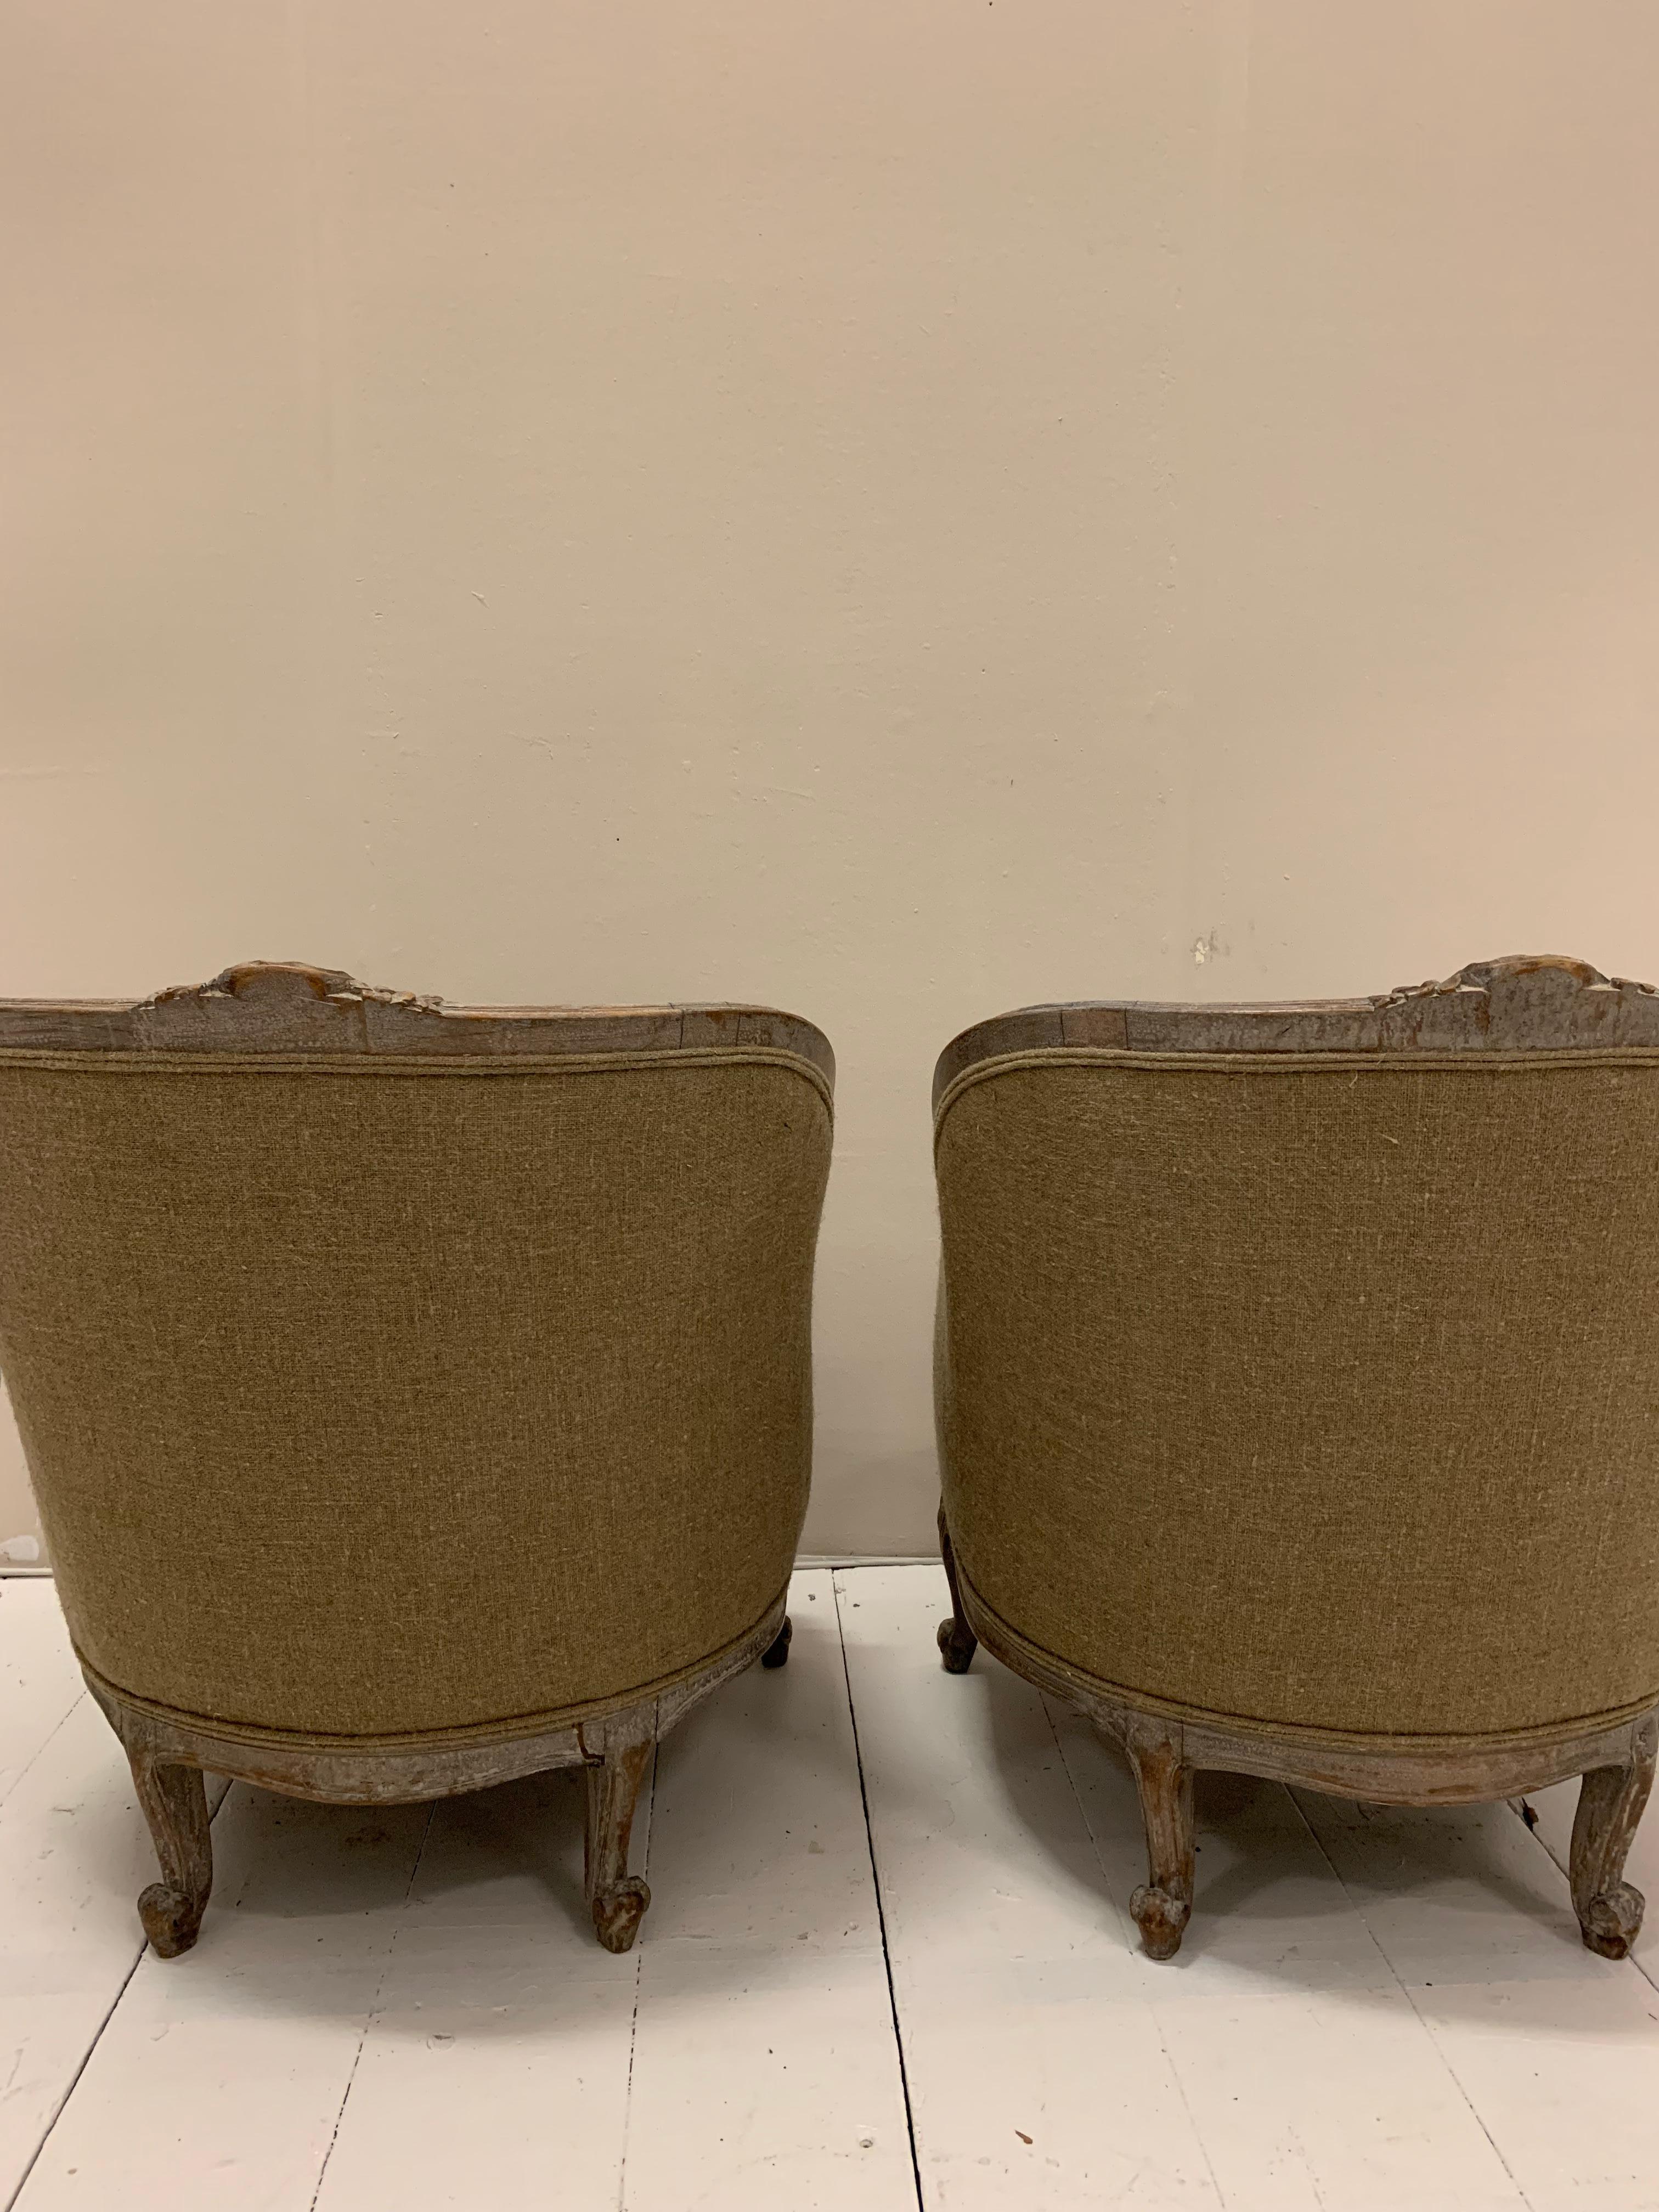 Limed Pair of 1920s Swedish Fauteuils Armchairs Upholstered in Mid-Taupe Linen Fabric For Sale